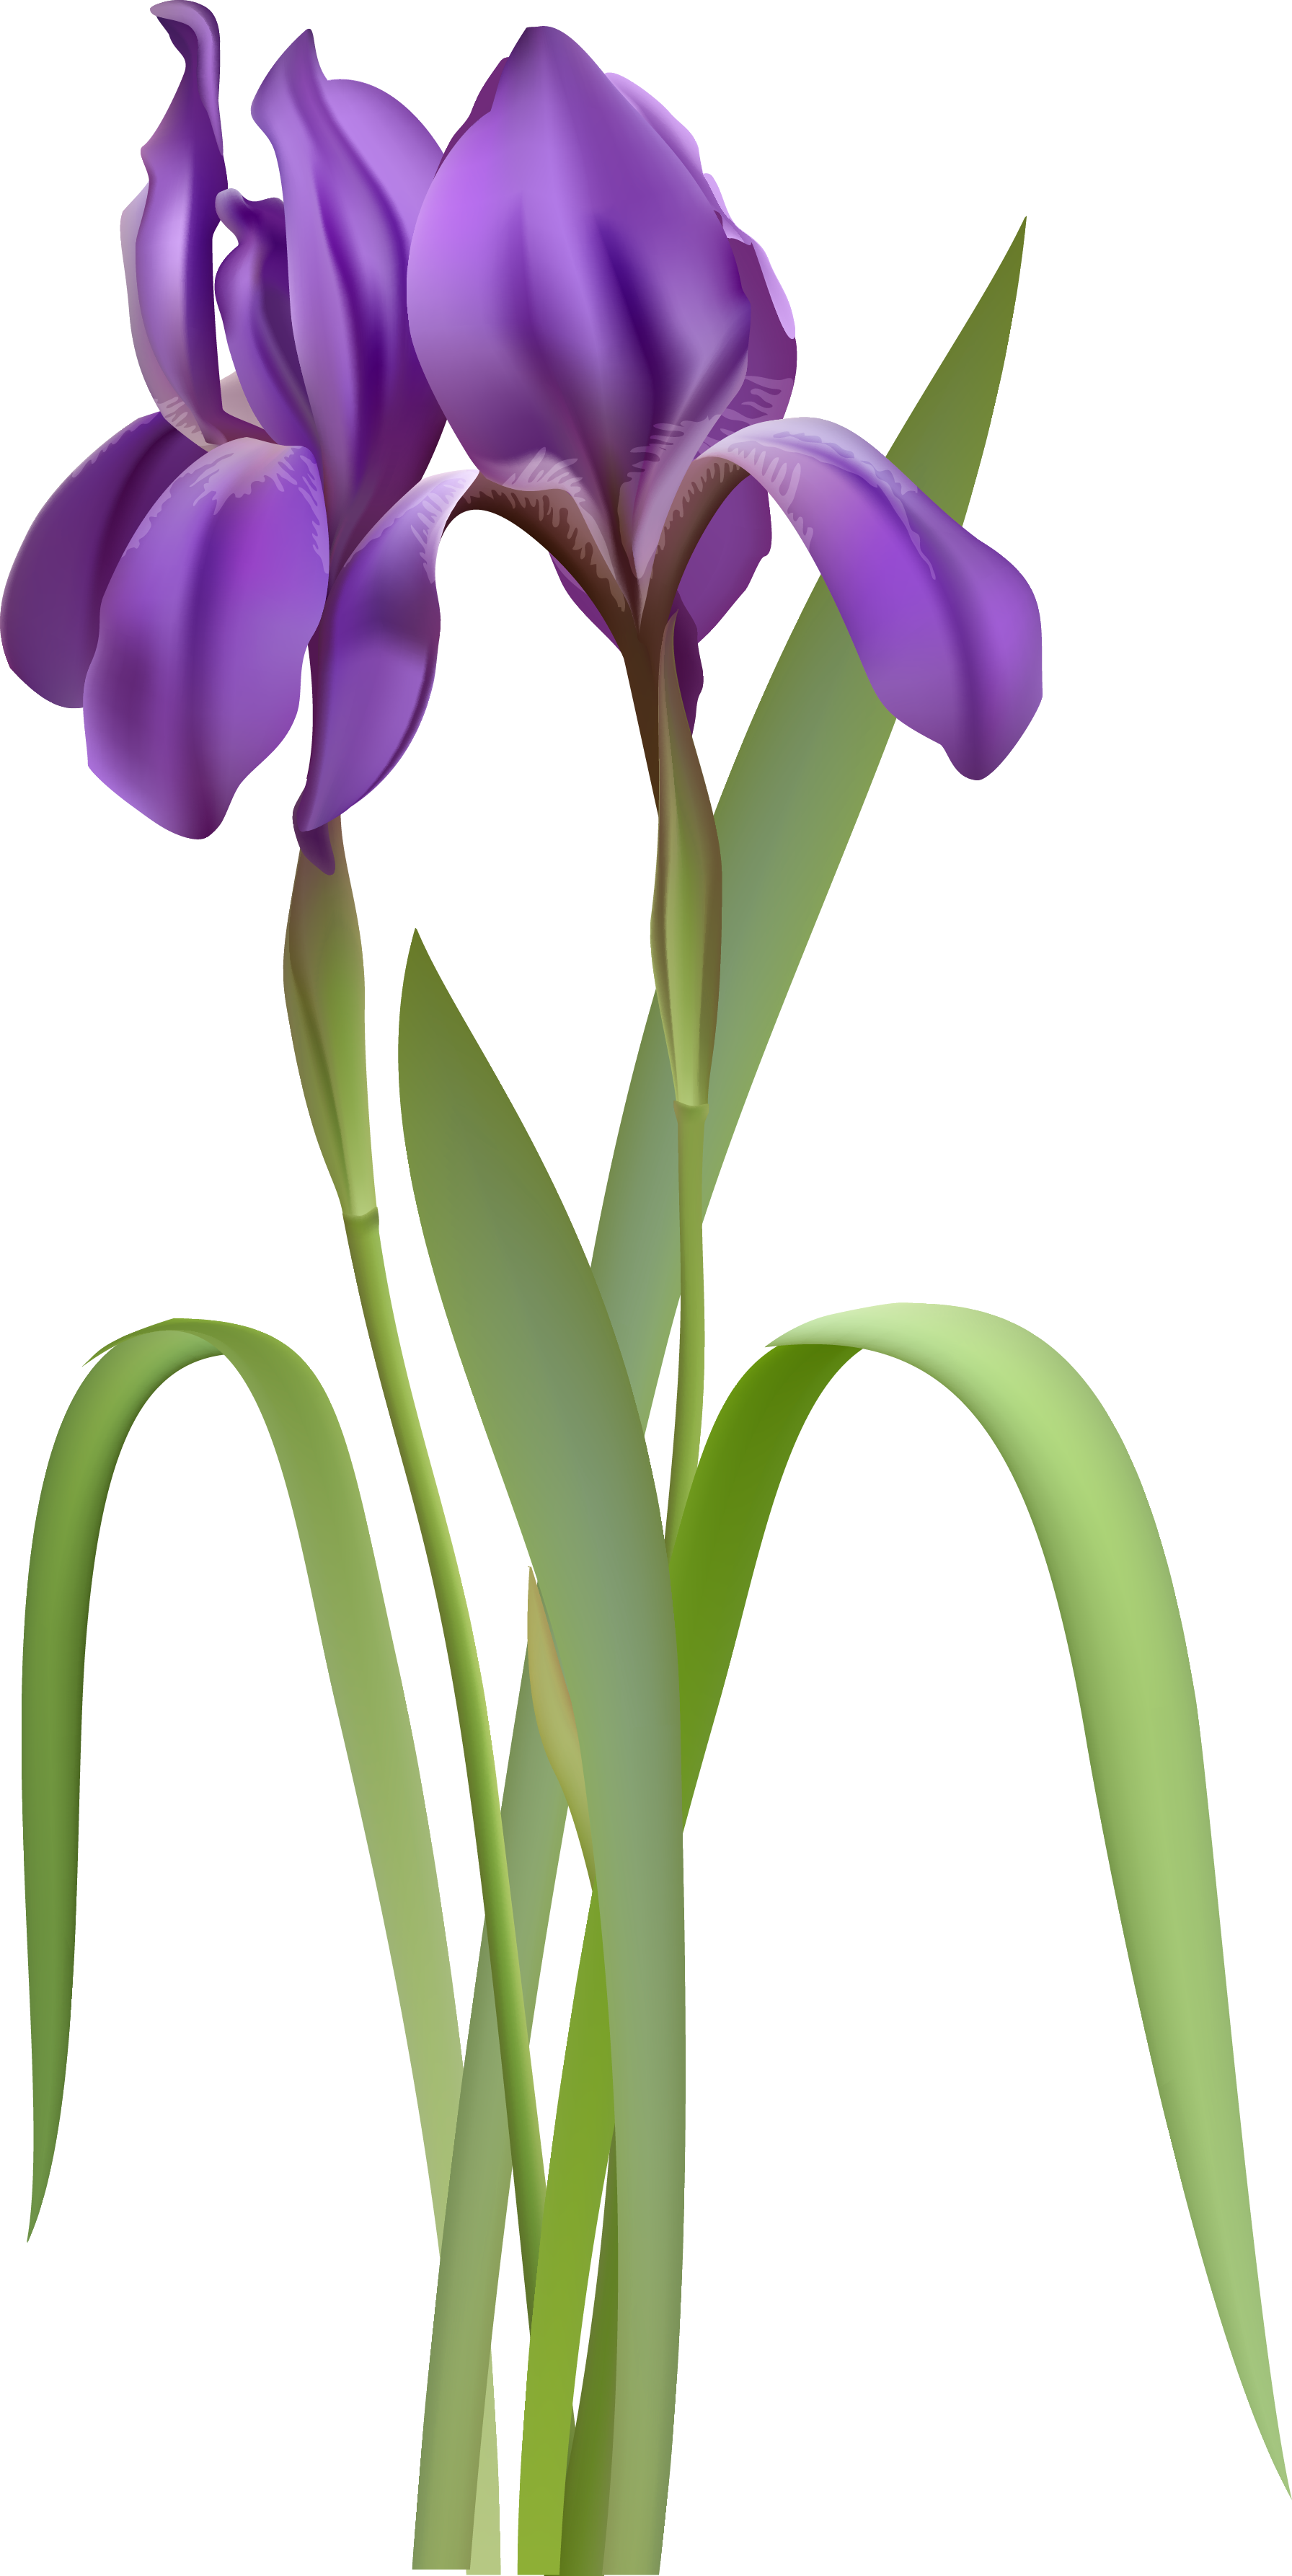 Spring clipart gallery yopriceville. Iris flower png